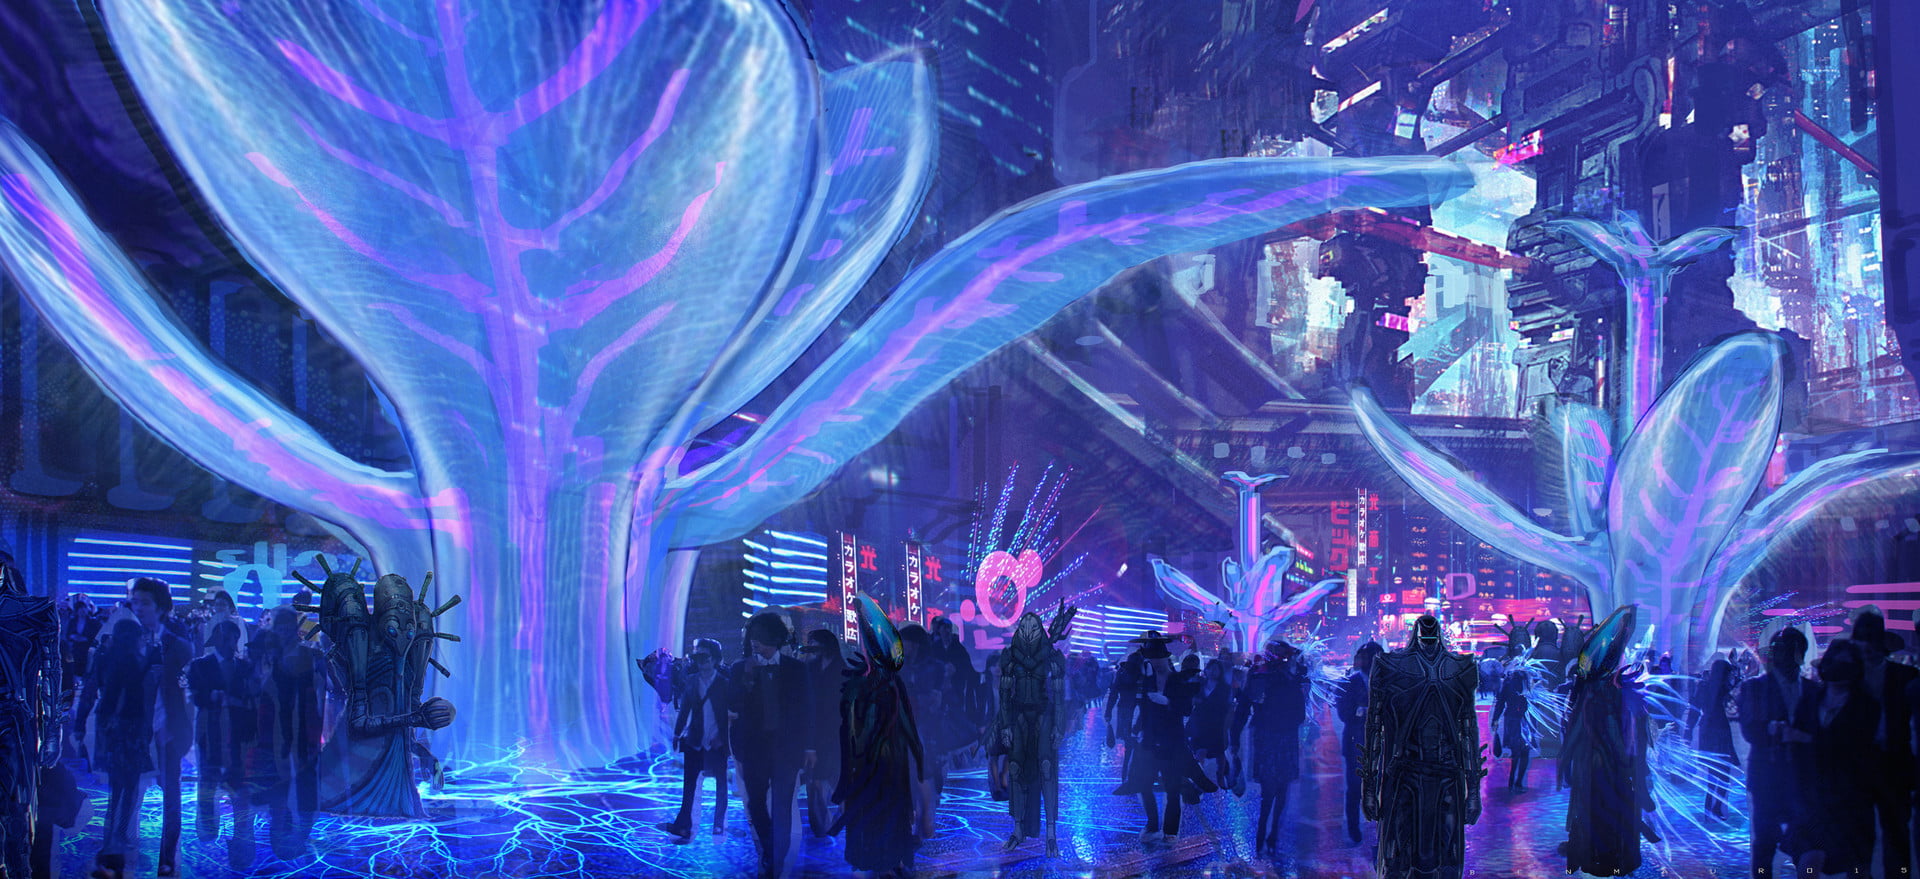 valerian-and-the-city-of-a-thousand-planets-concept-cars-big-market-crowds-wallpaper.jpg